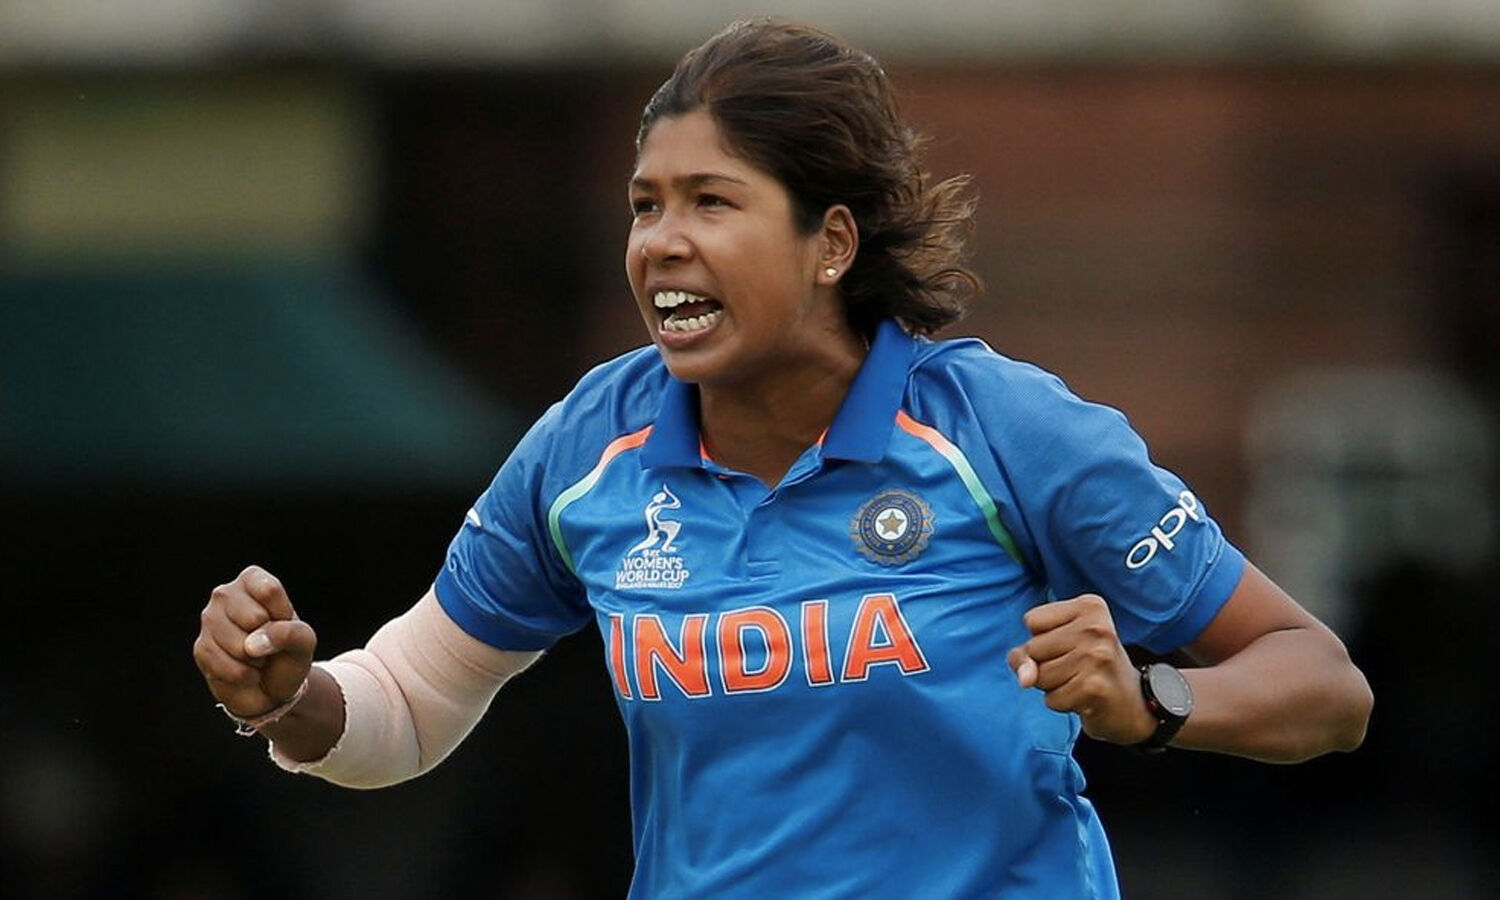 Representing India is the biggest motivation for me': Jhulan Goswami